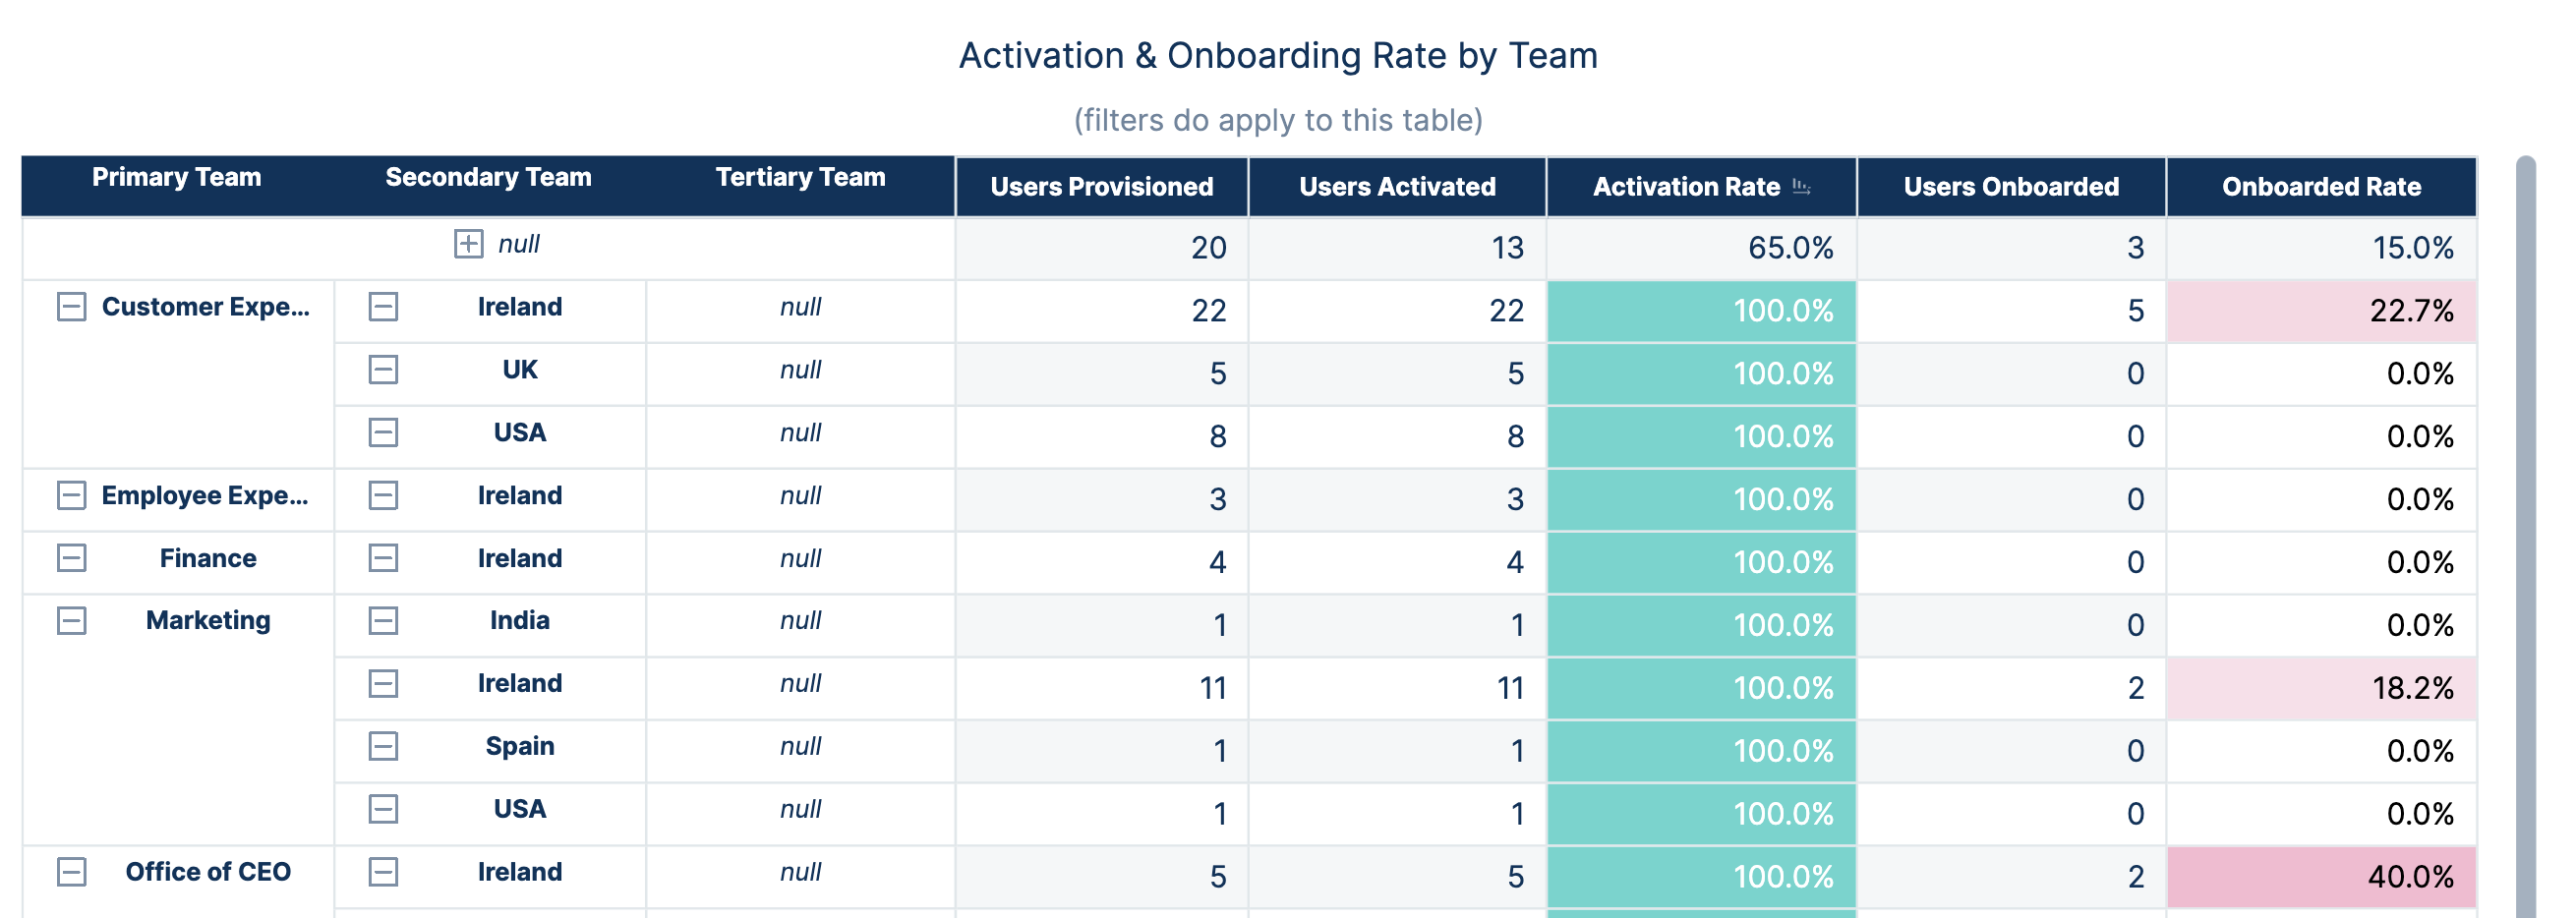 AA-Activation___onboarding_rate_by_team.png